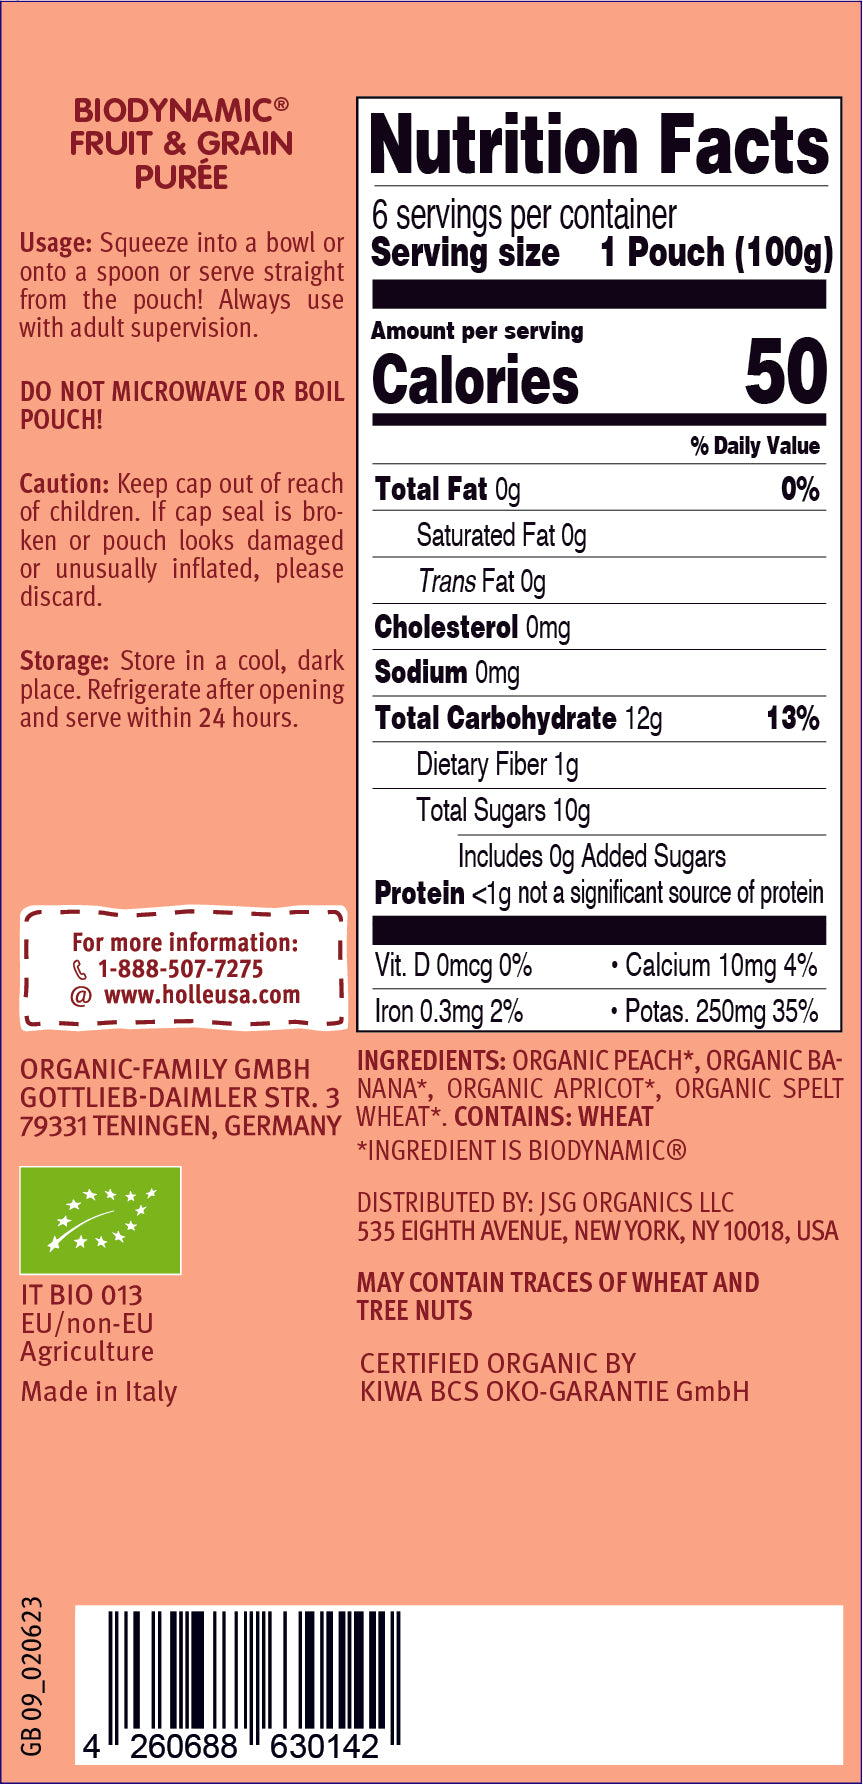 Panda Peach: nutrition facts and ingredients